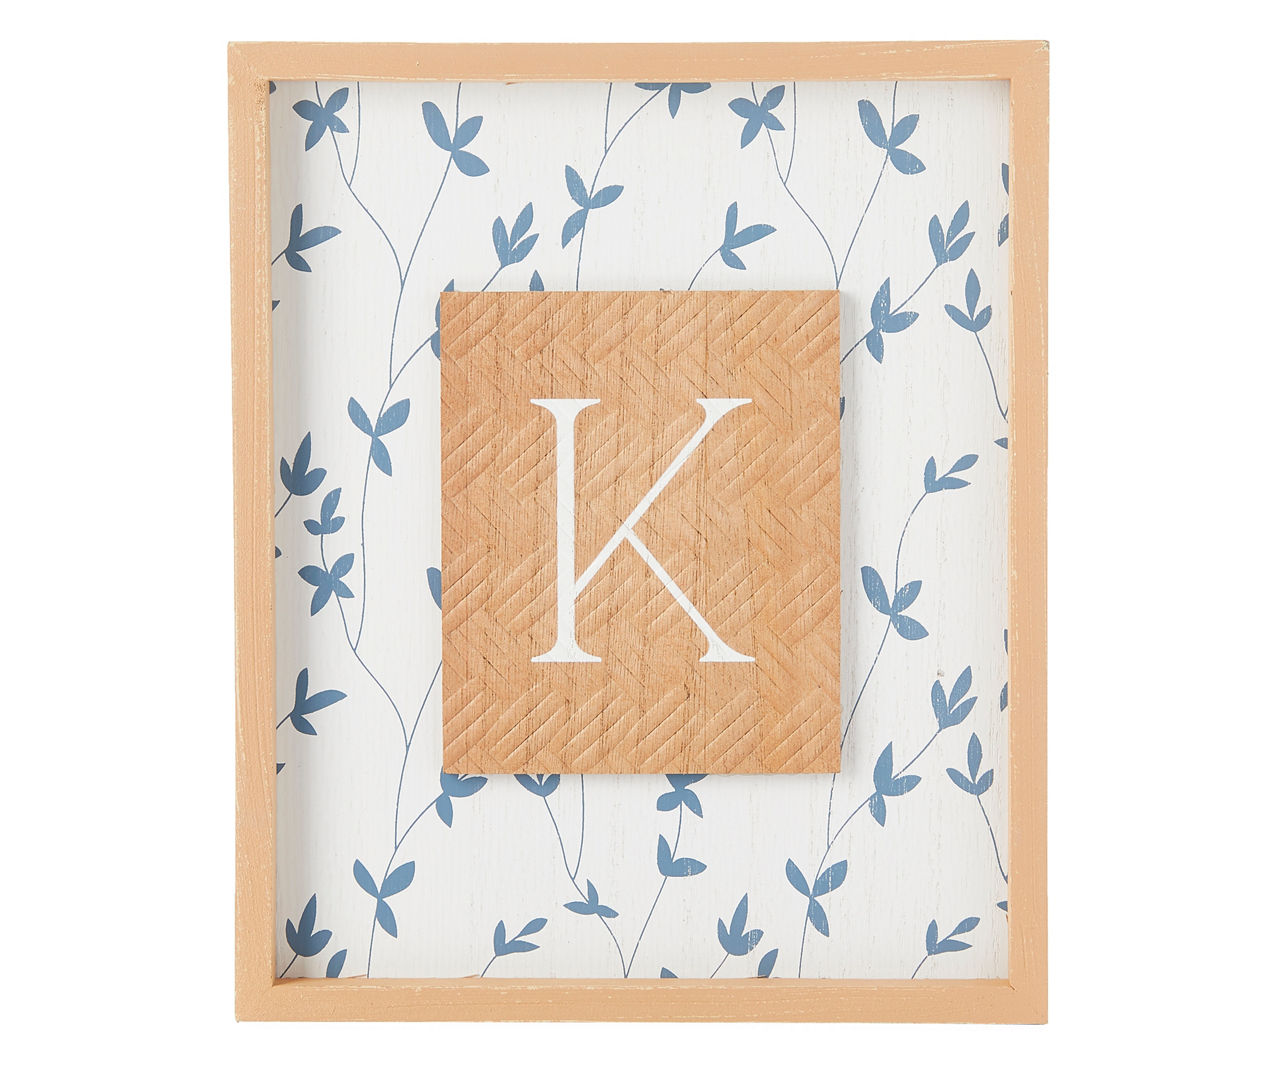 "K" White, Brown & Blue Floral Tabletop Plaque With Easel